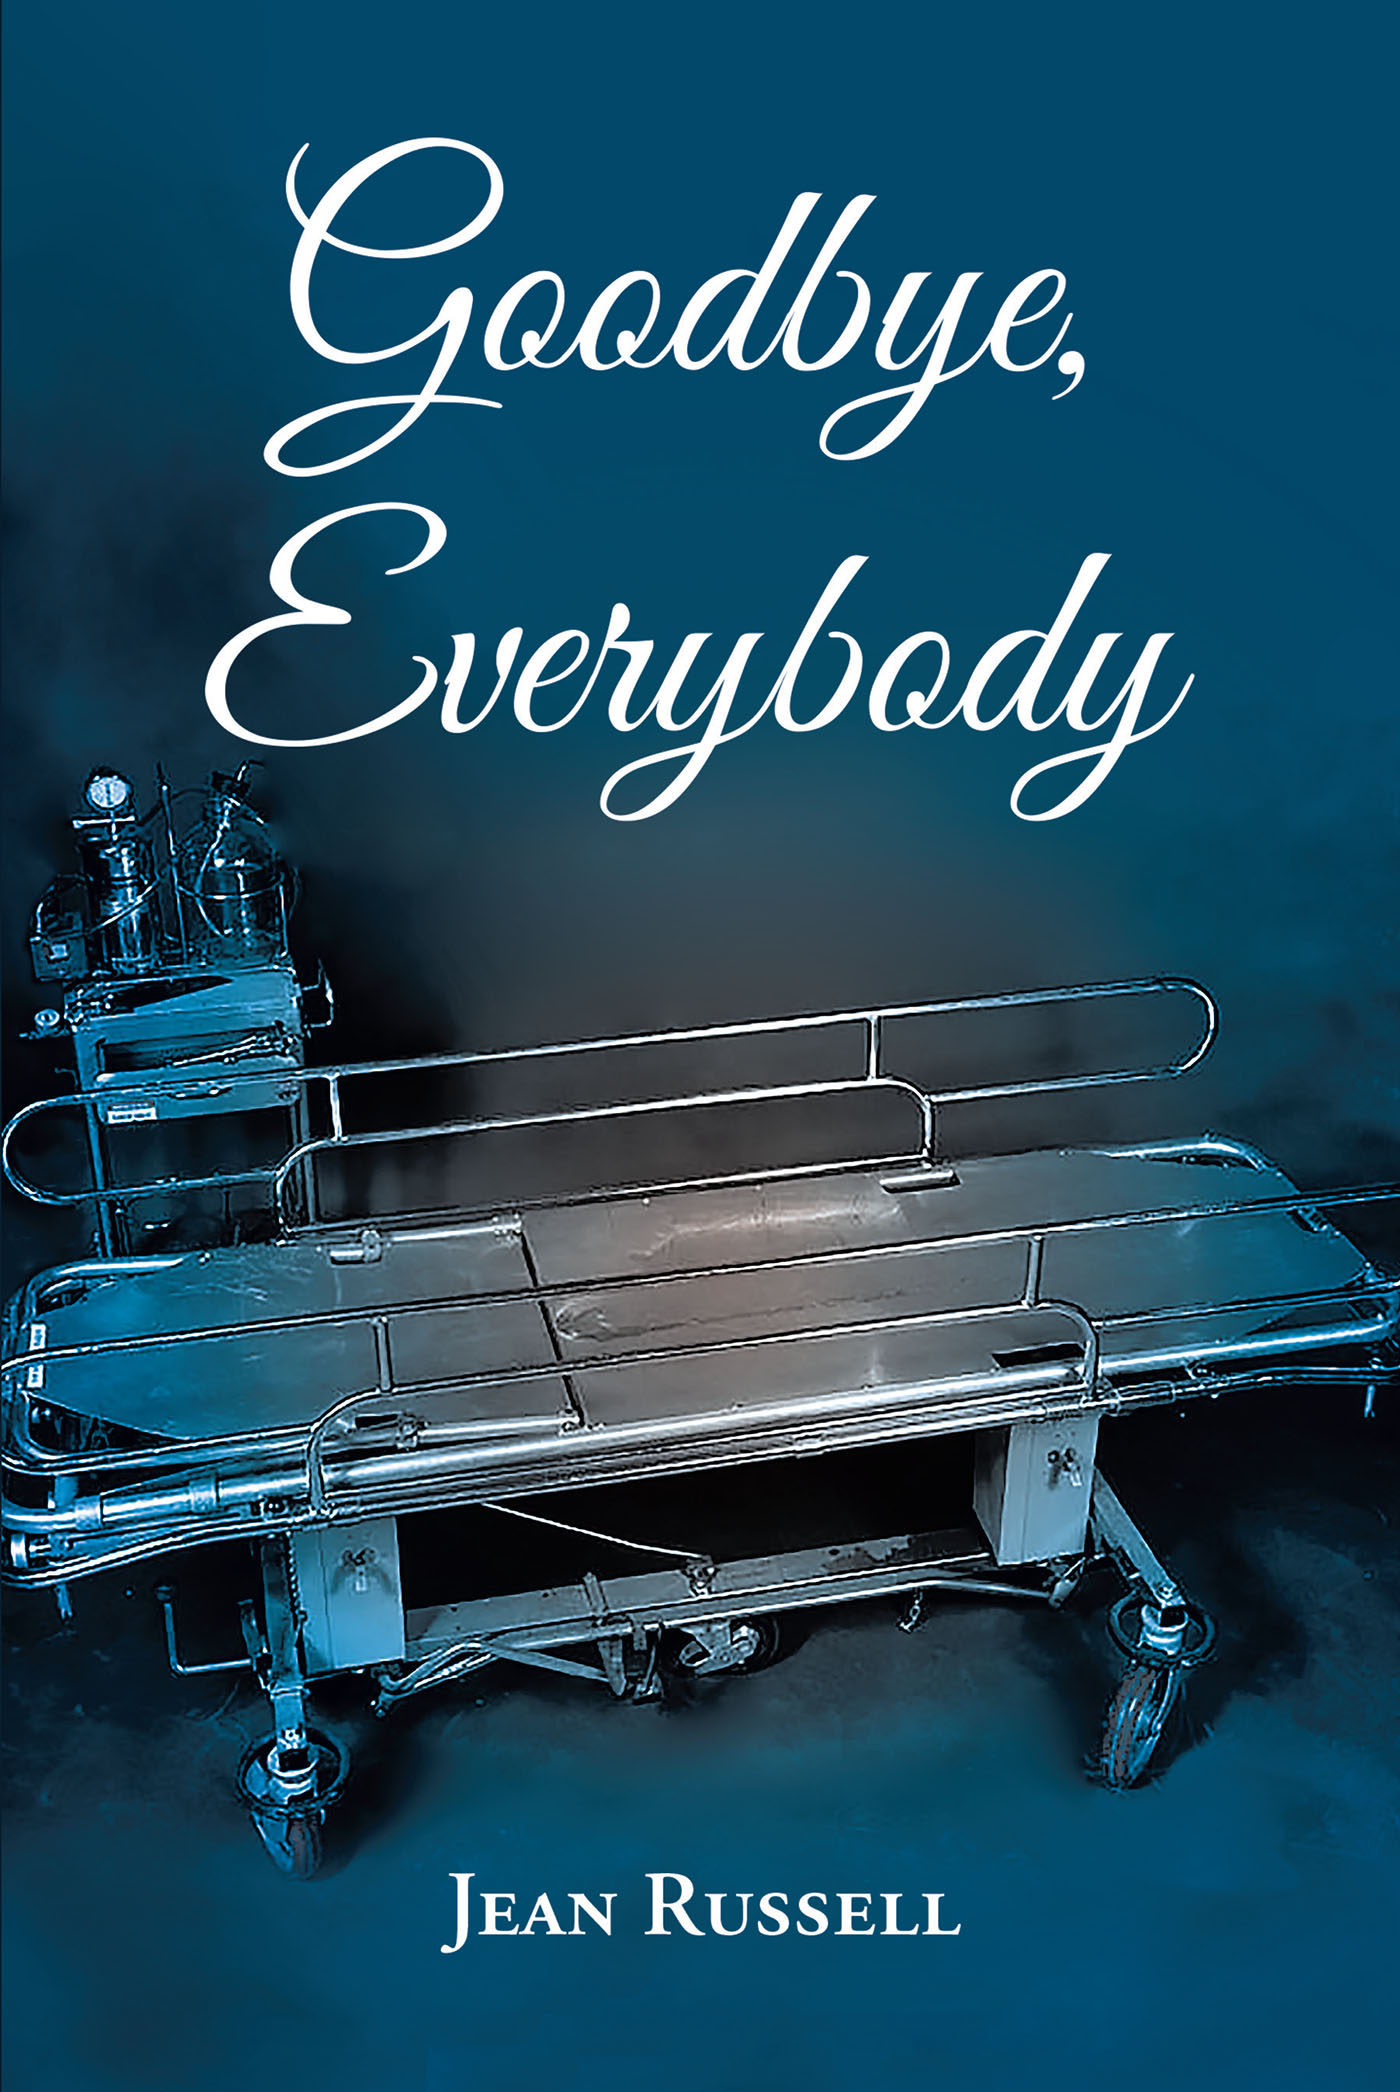 Jean Russell’s Newly Released "Goodbye, Everybody" is a Powerful Account of a Complex Medical Incident and the Journey to Healing